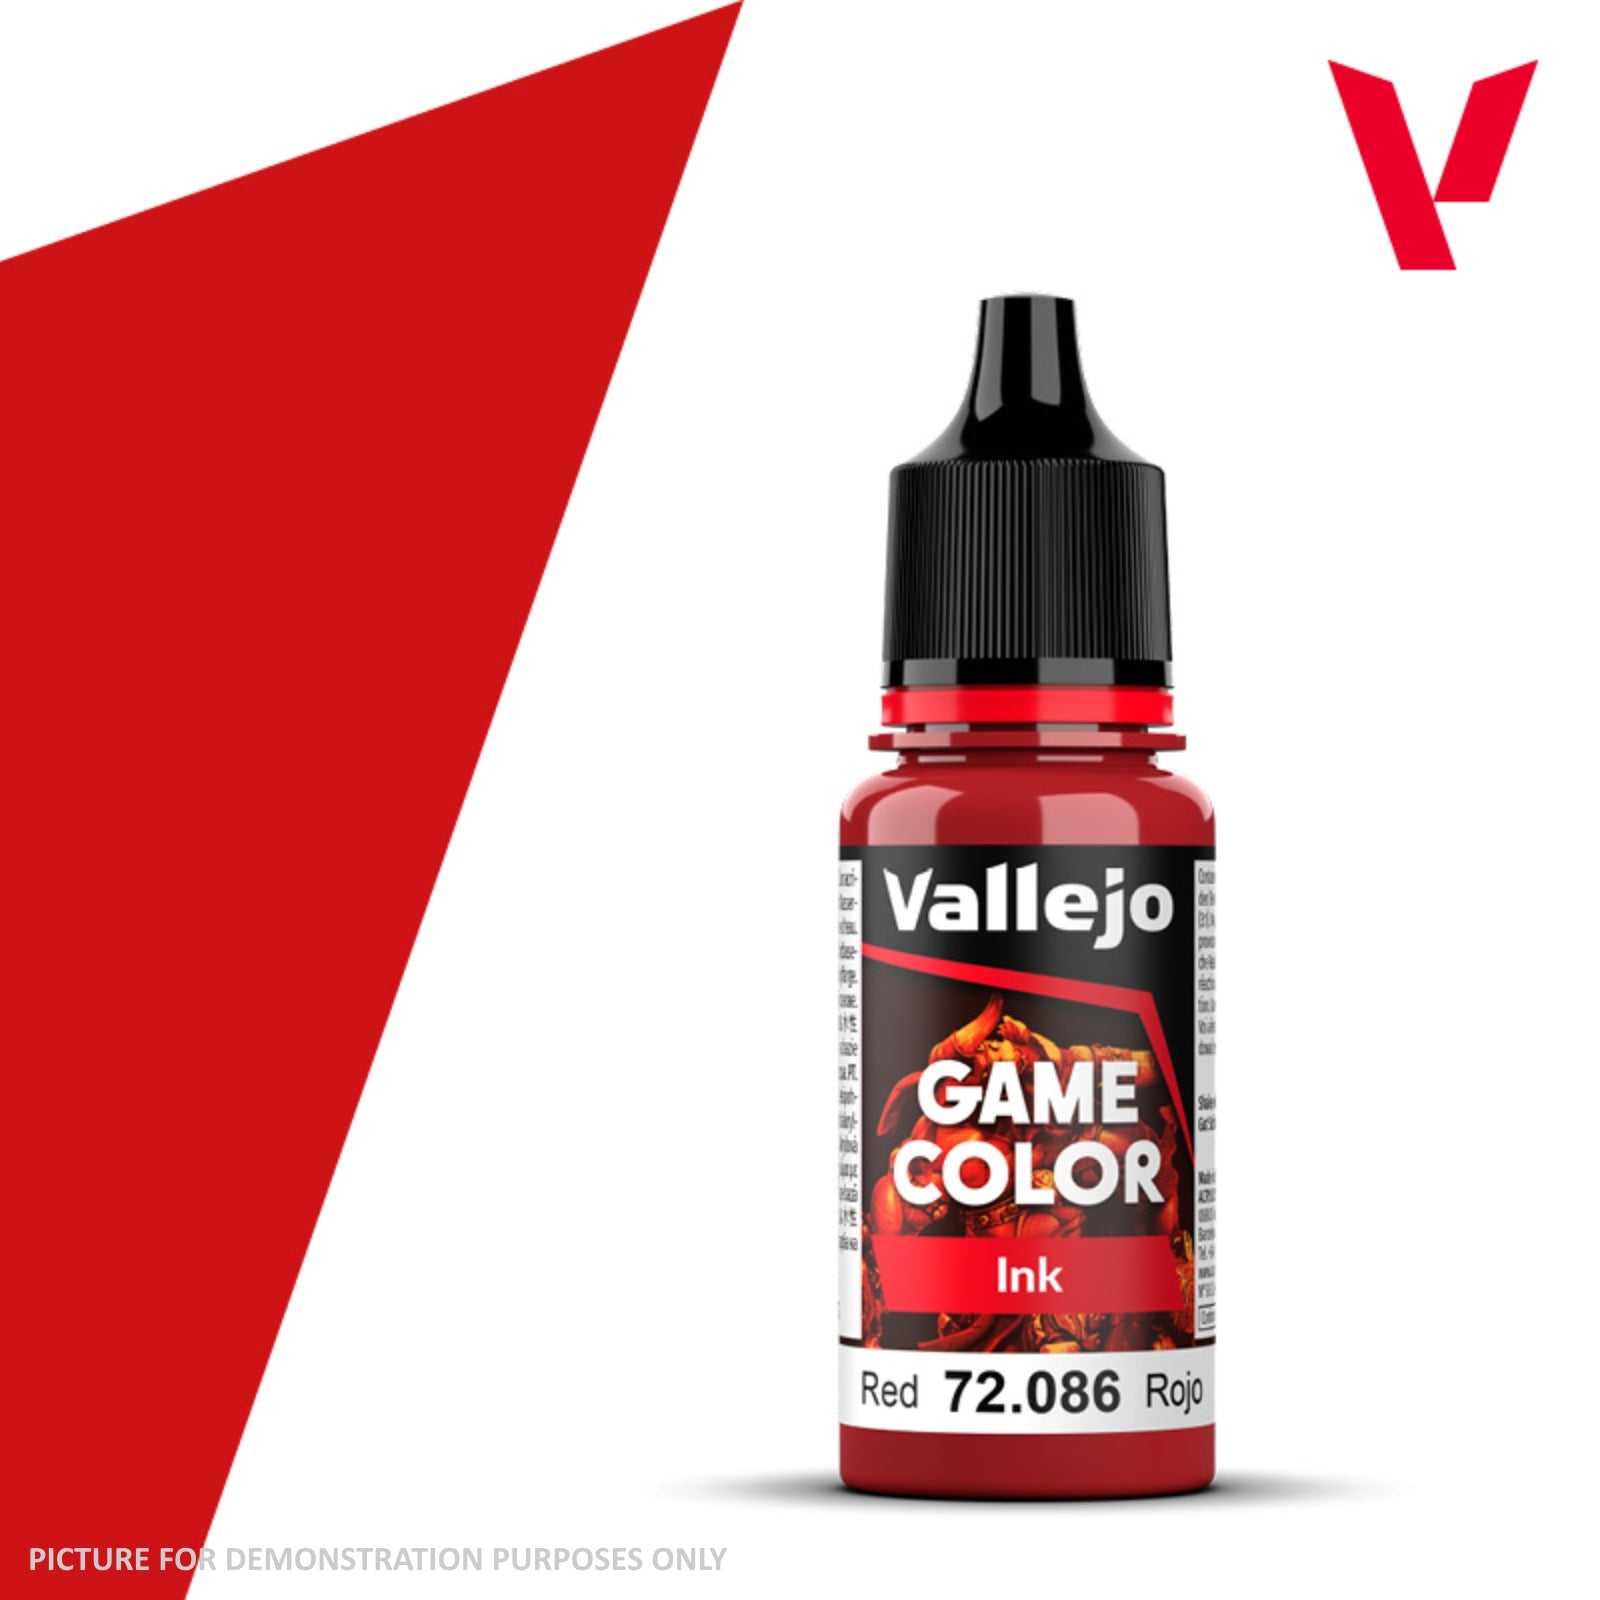 Vallejo Game Colour Ink - 72.086 Red 18ml